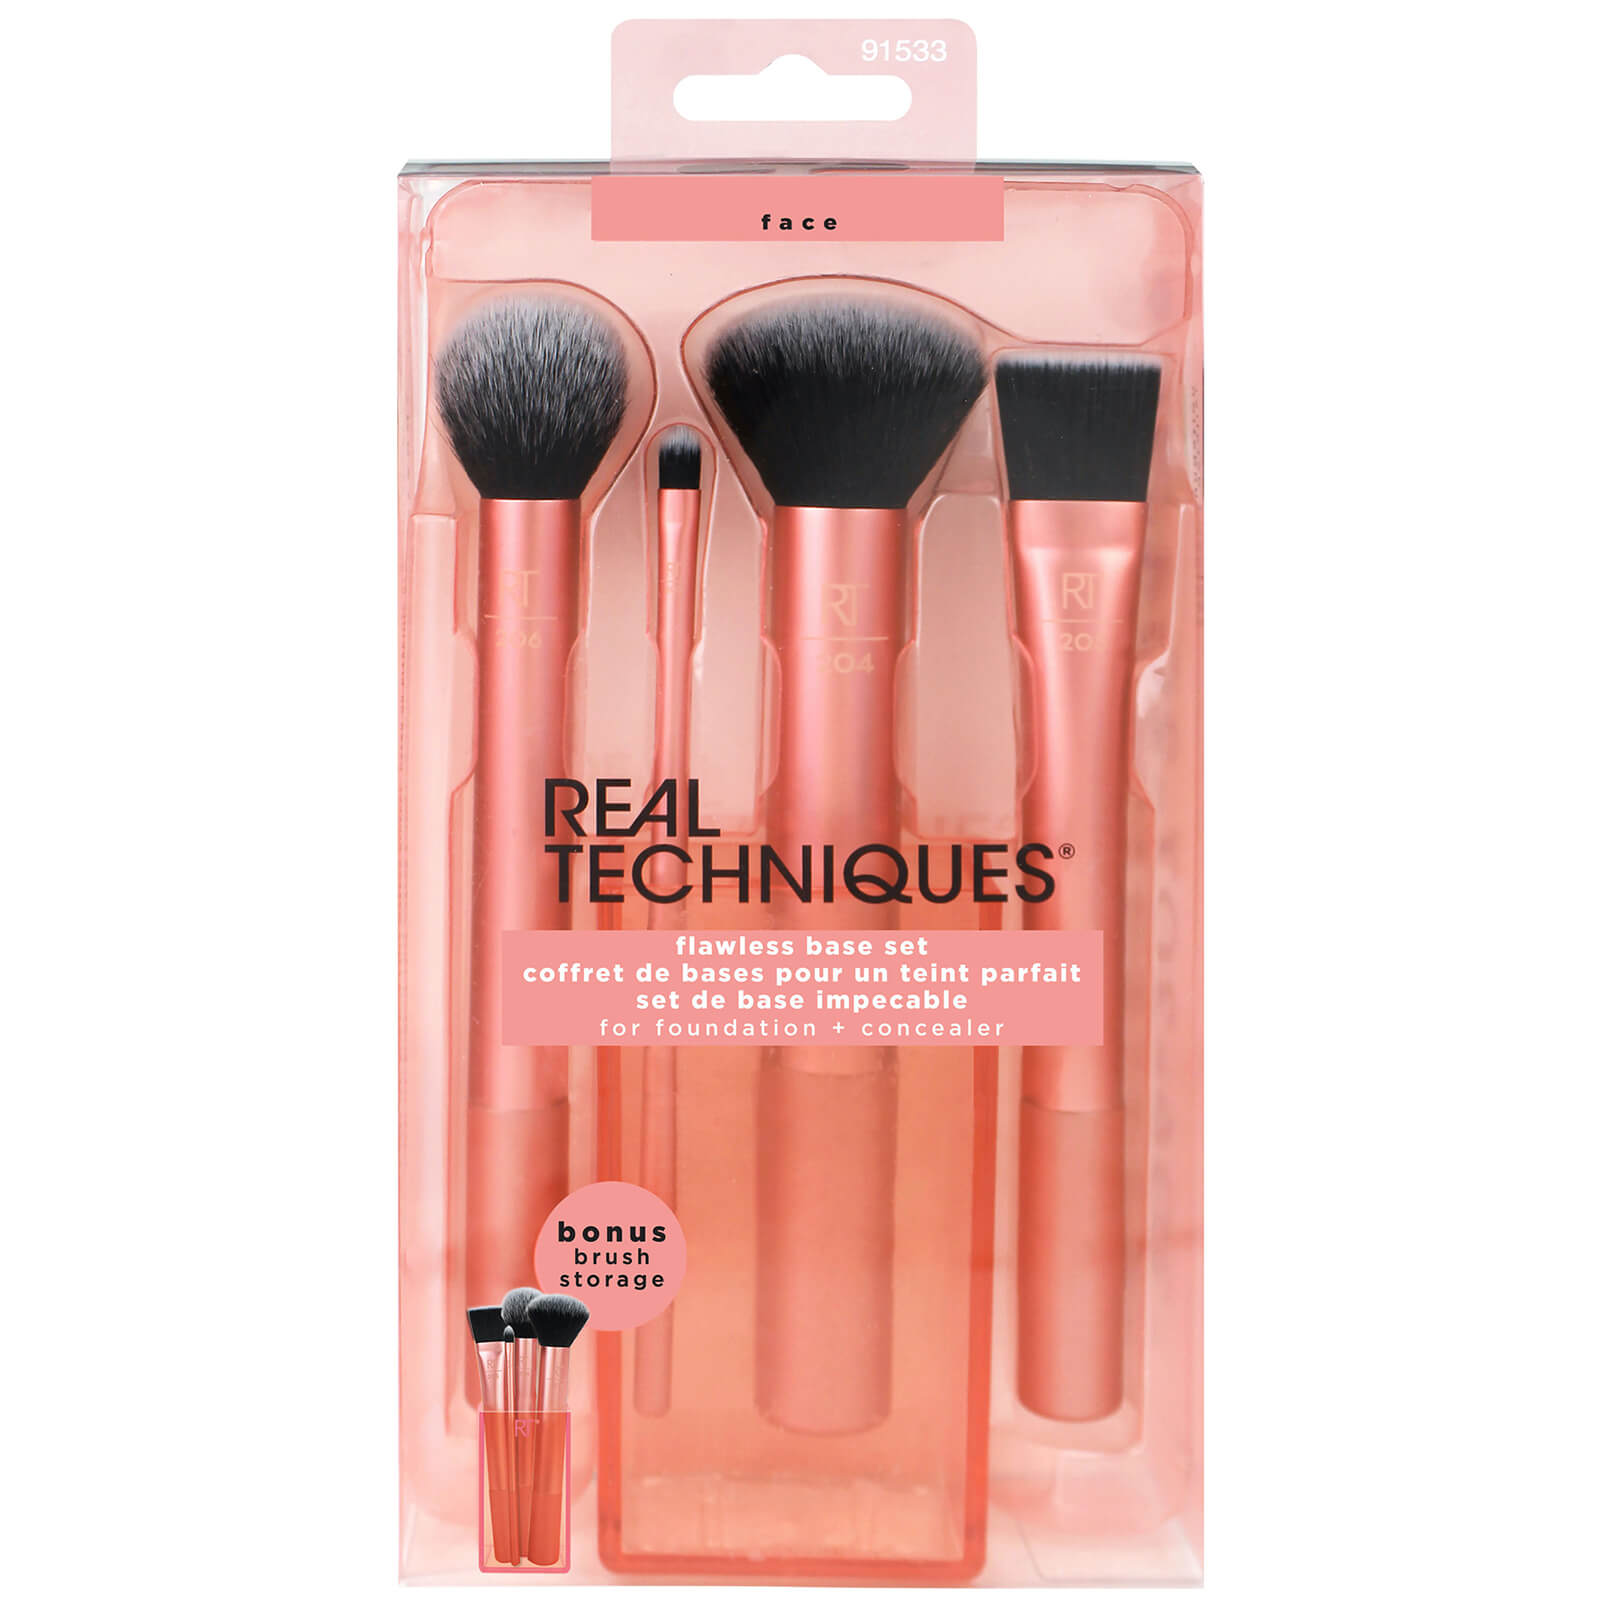 real techniques flawless base brush set (worth £36.97)